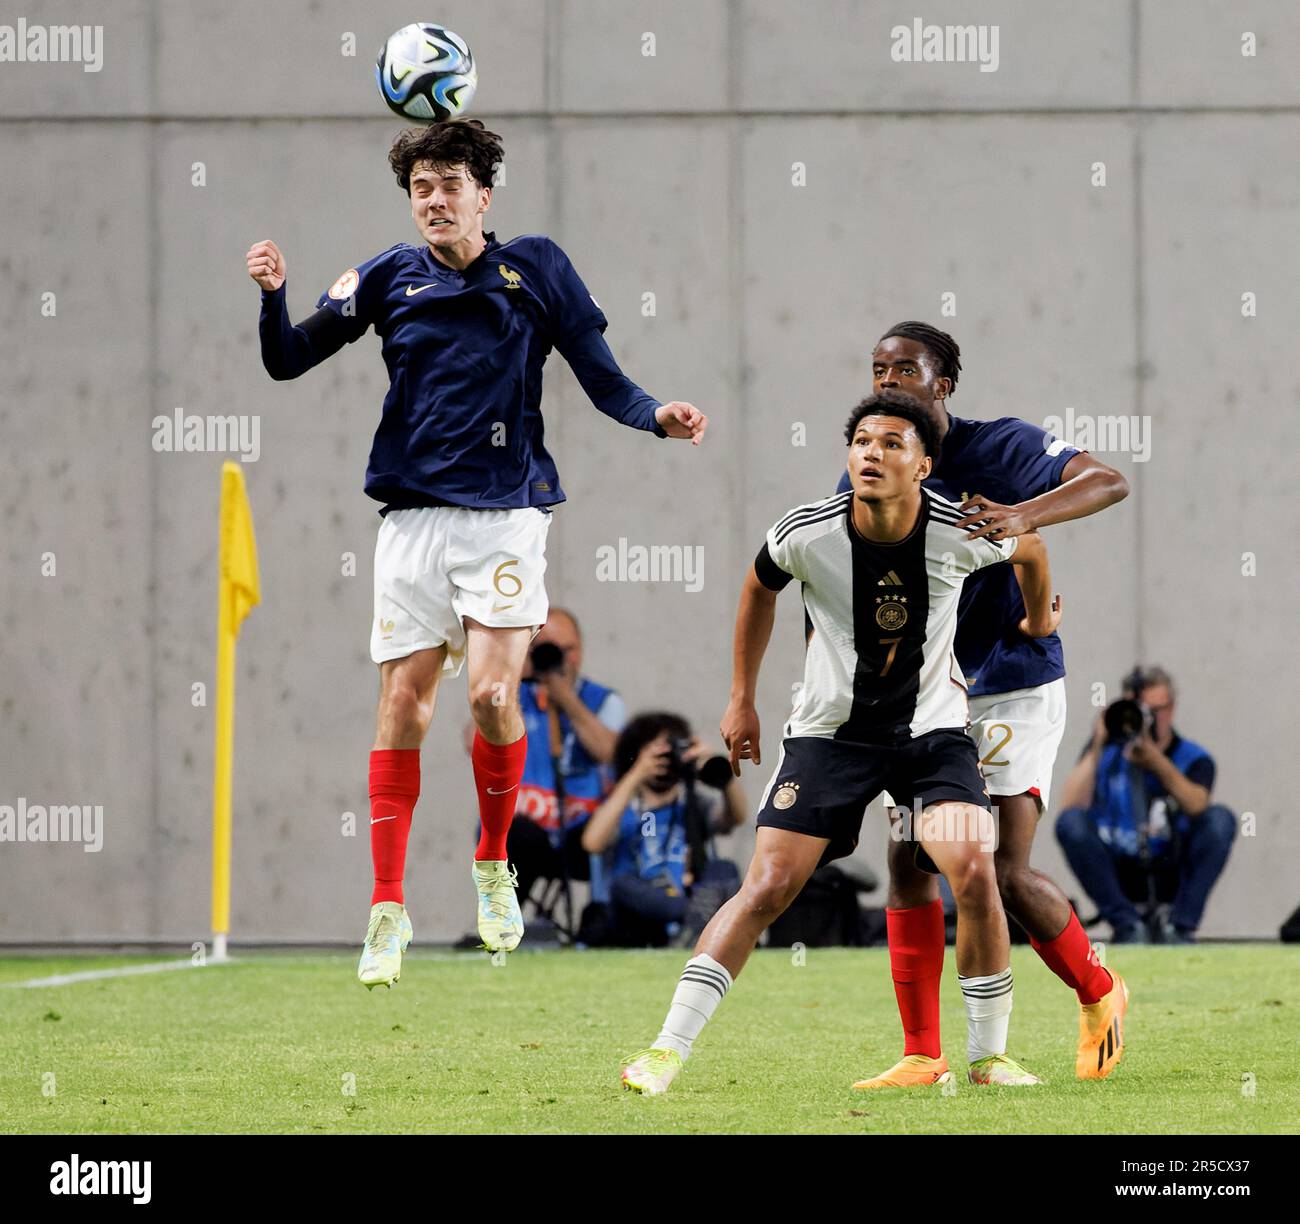 Budapest, Hungary. 2nd June, 2023. -(l-r) Nolan Ferro of France heads the ball in front of Paris Brunner of Germany and Yvann Titi of France during the UEFA European Under-17 Championship 2023 Final match between Germany and France at Hidegkuti Nandor Stadium on June 2, 2023 in Budapest, Hungary. Credit: Laszlo Szirtesi/Alamy Live News Stock Photo